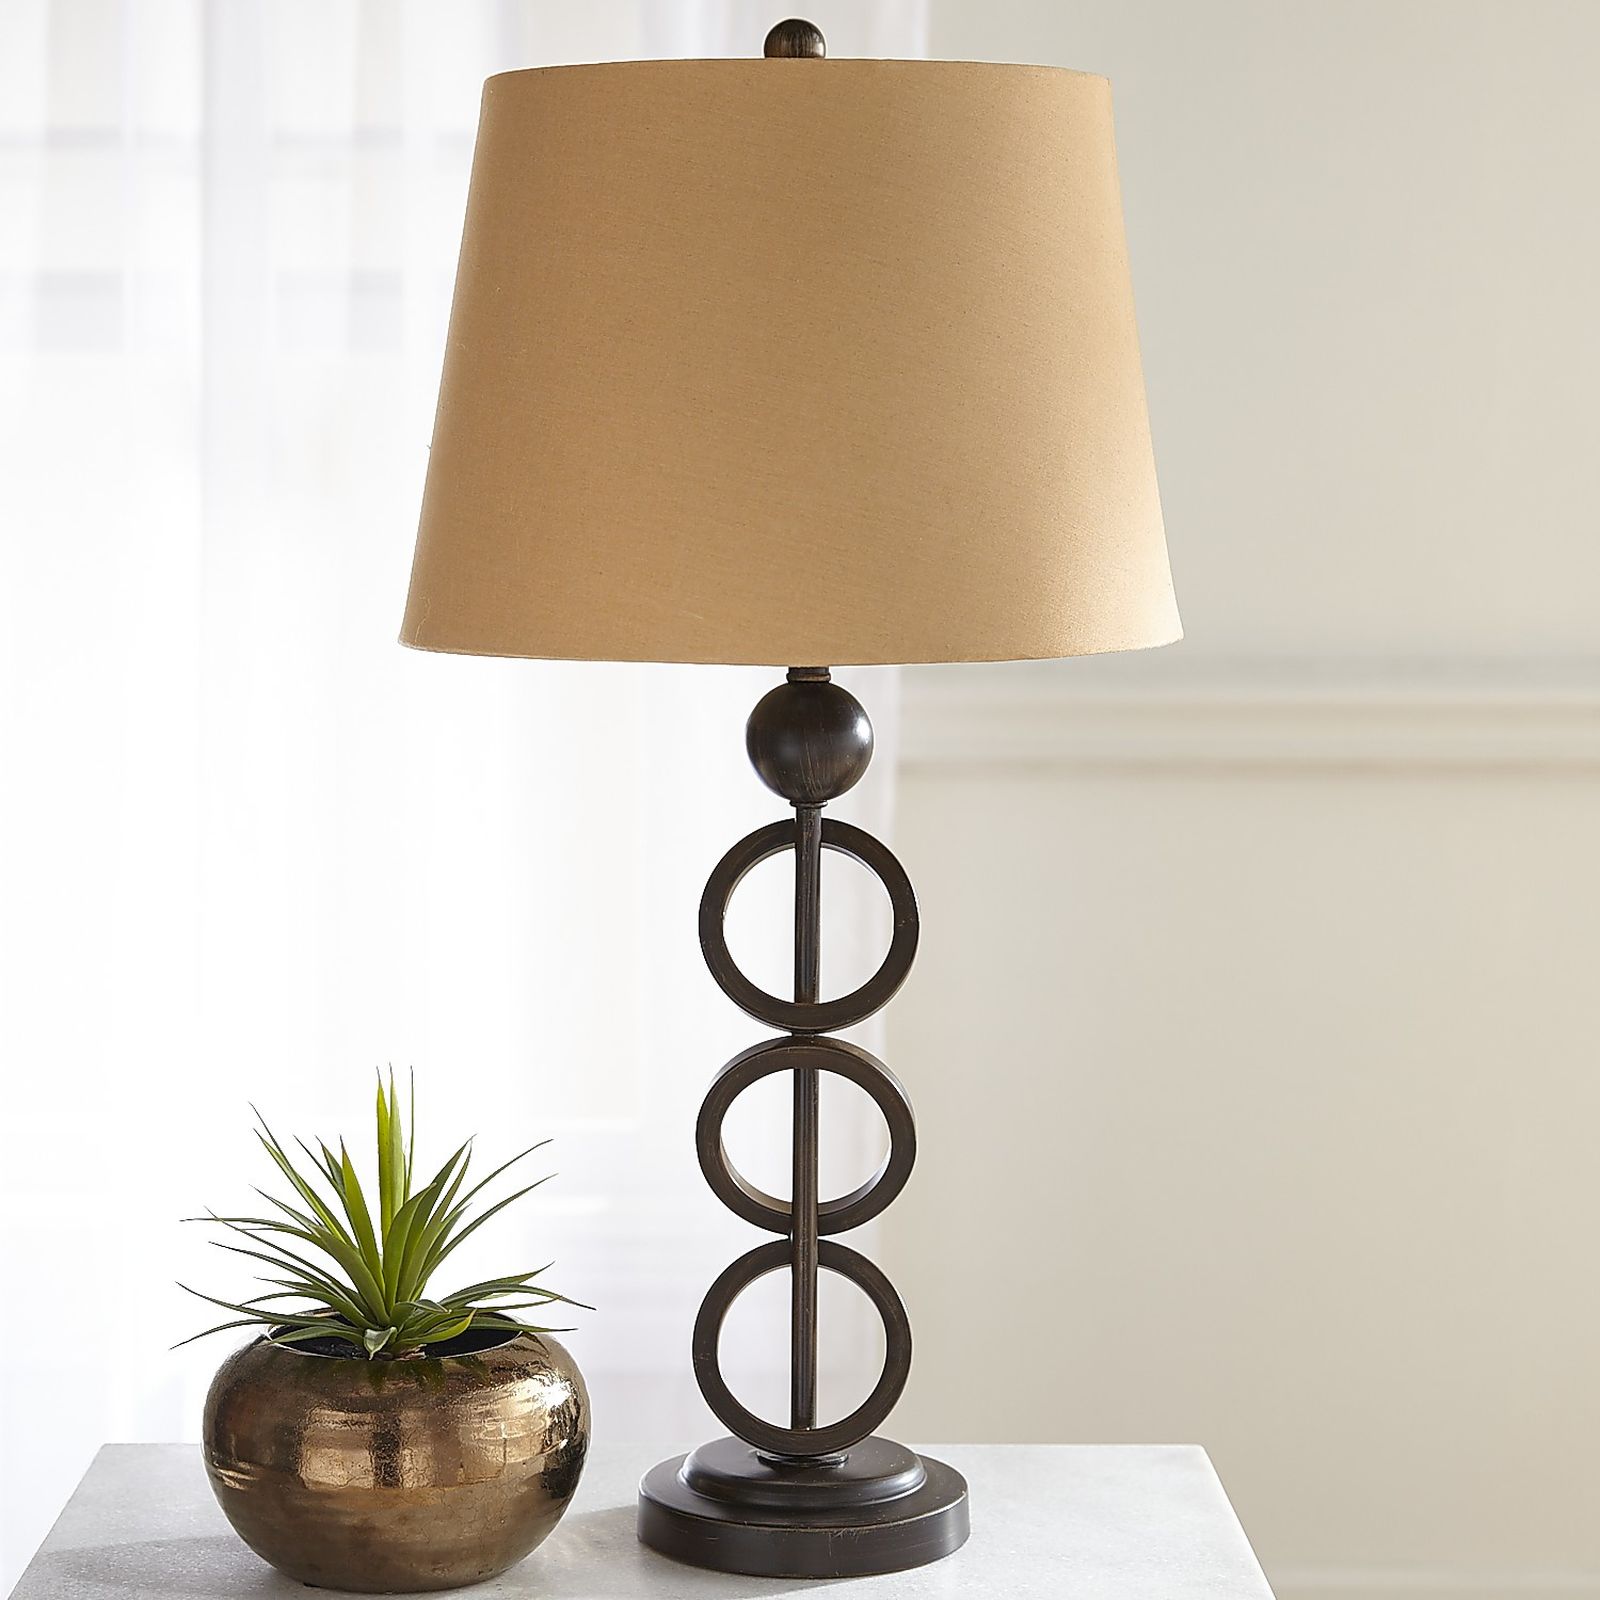 Stylish Table Lamp Designs, Latest Table Lamps Designs